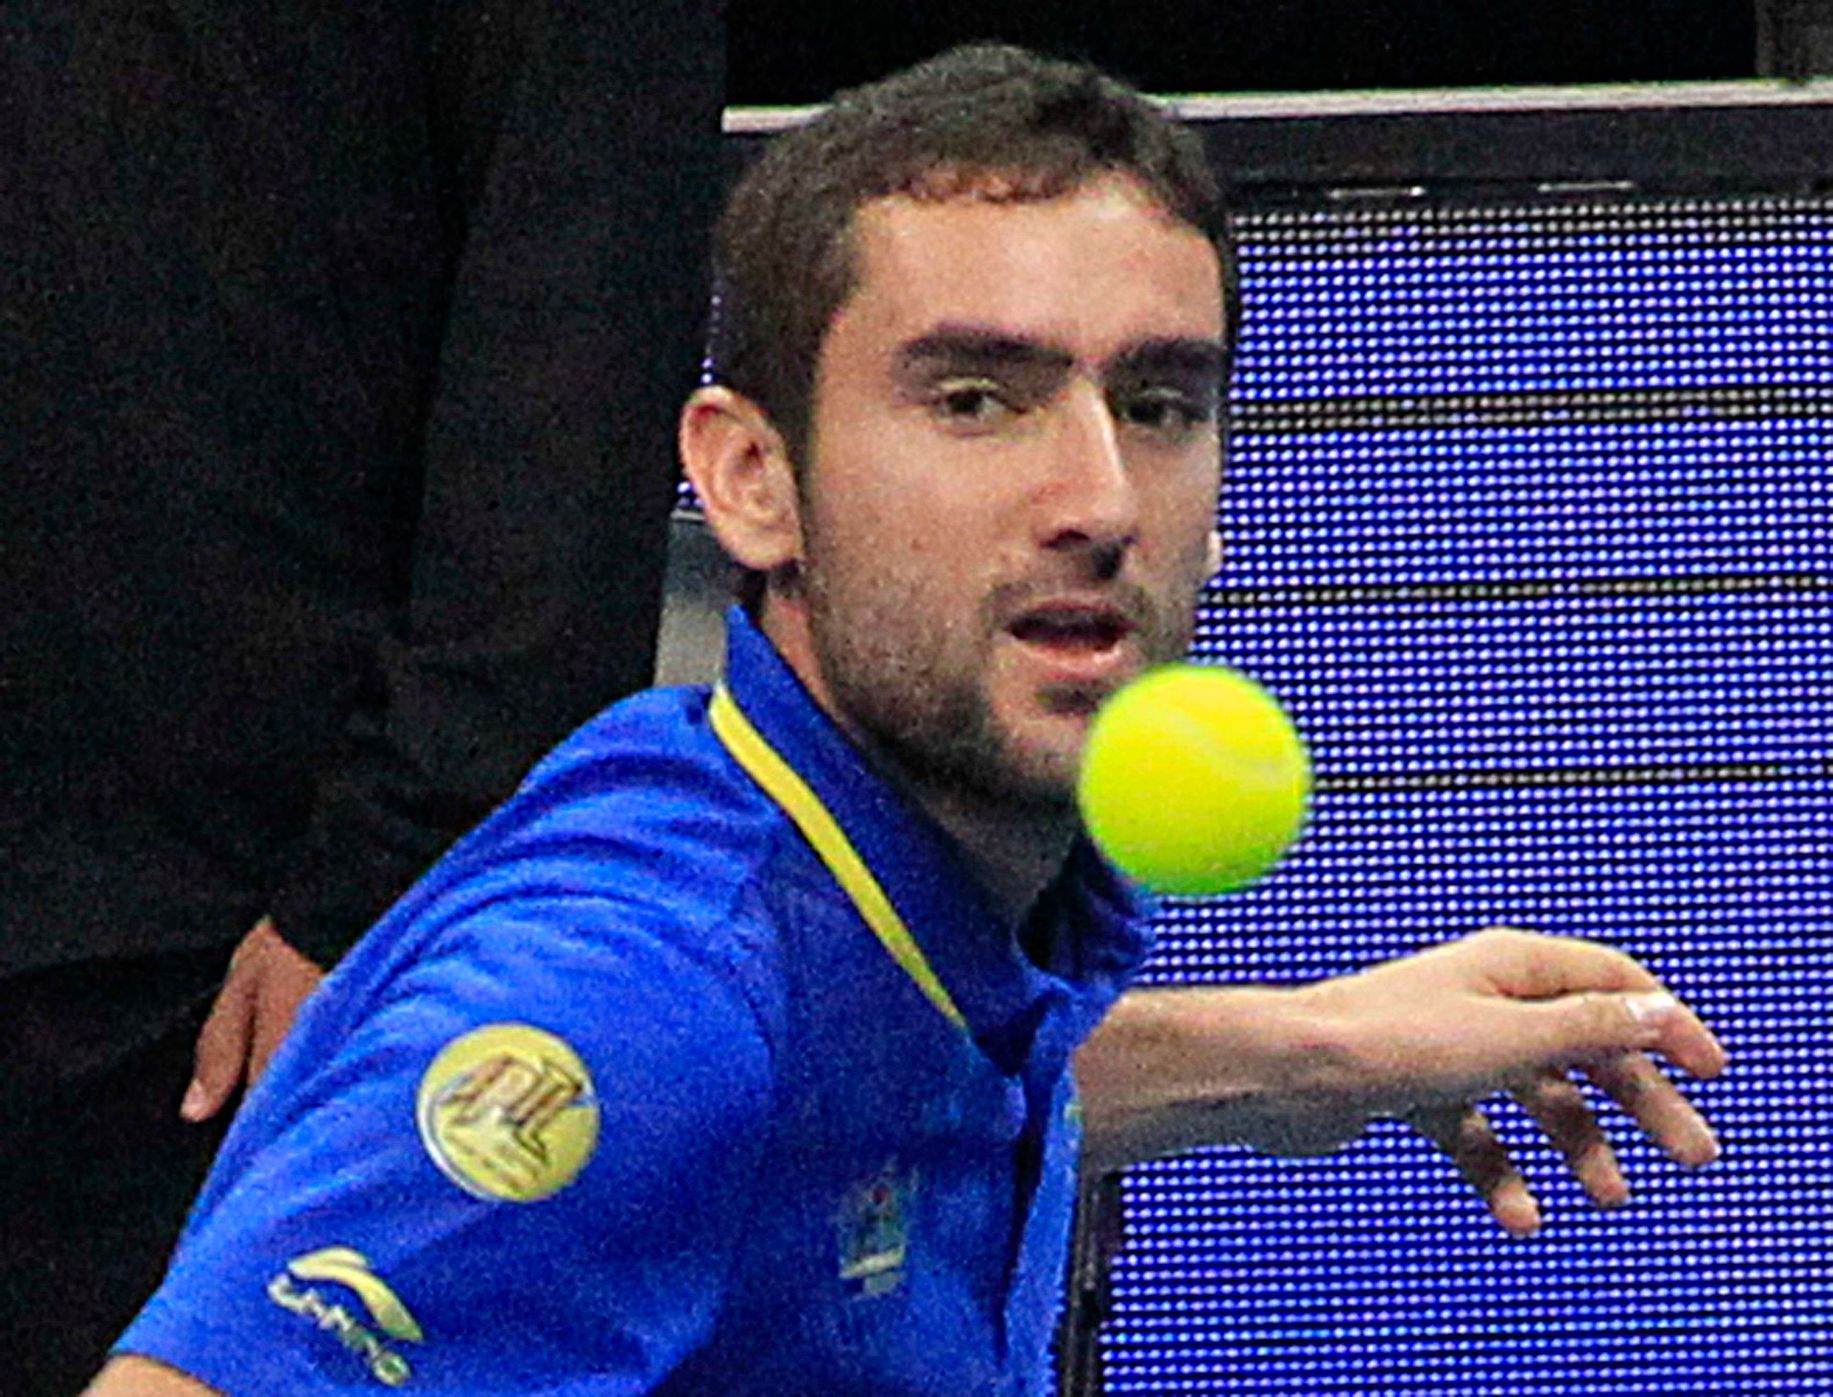 Cilic of the UAE Royals eyes the ball during his men's singles match against Berdych of the Singapore Slammers during the International Premier Tennis League in Manila